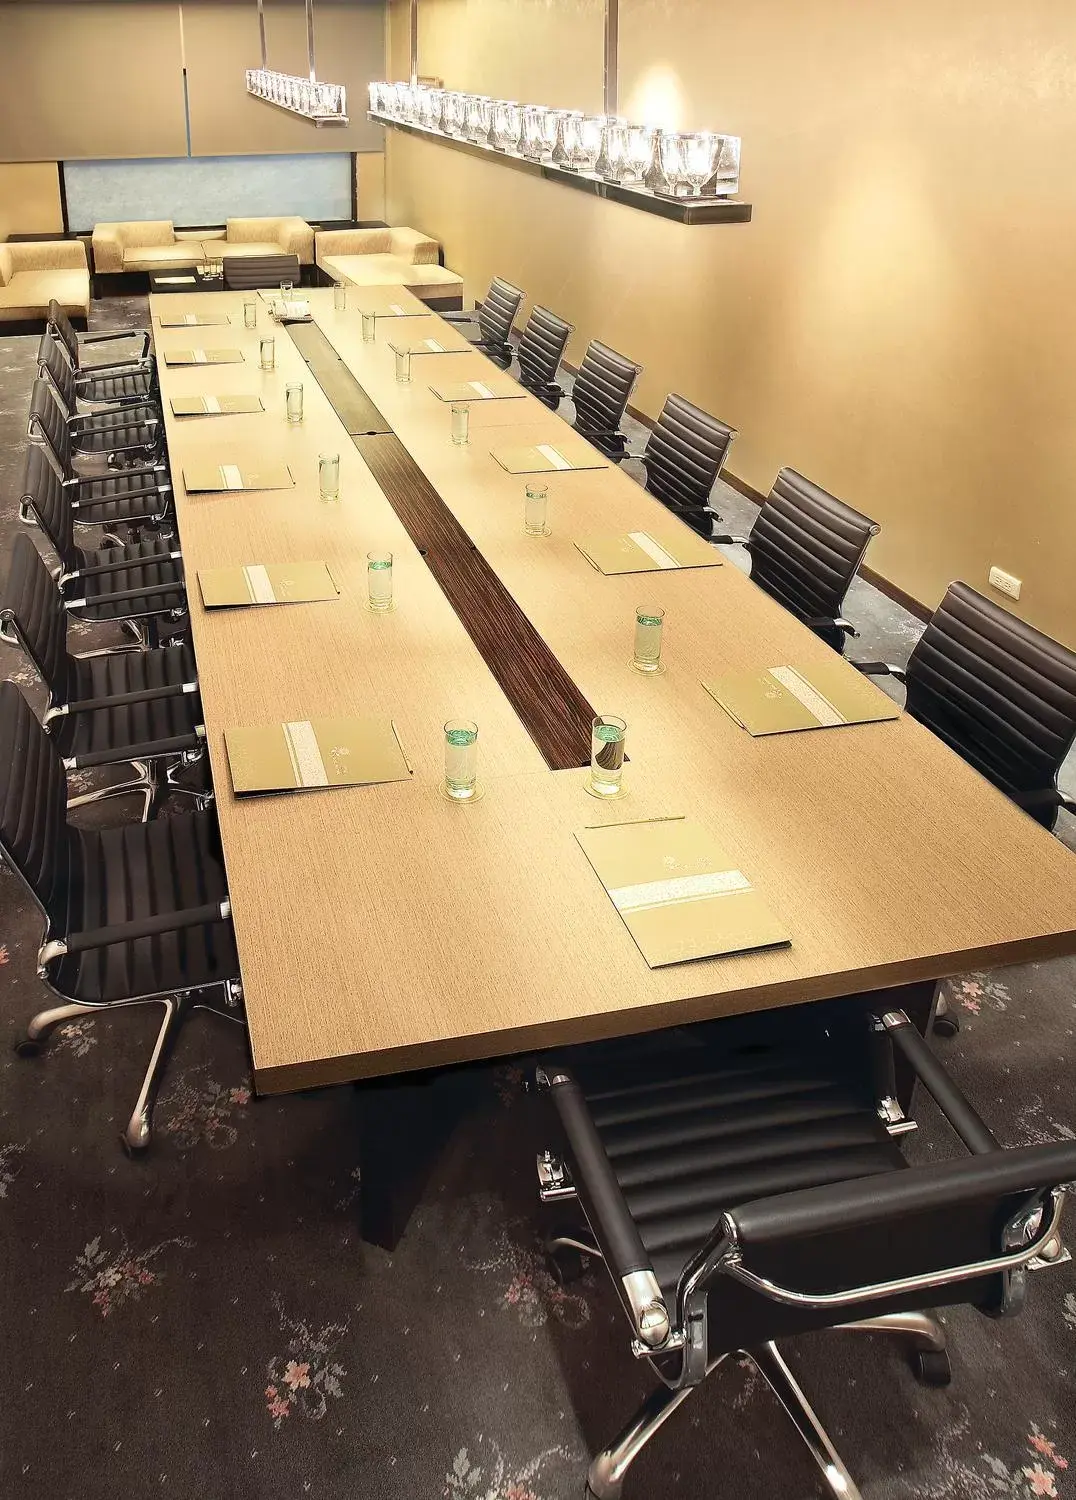 Business facilities in SOL Hotel